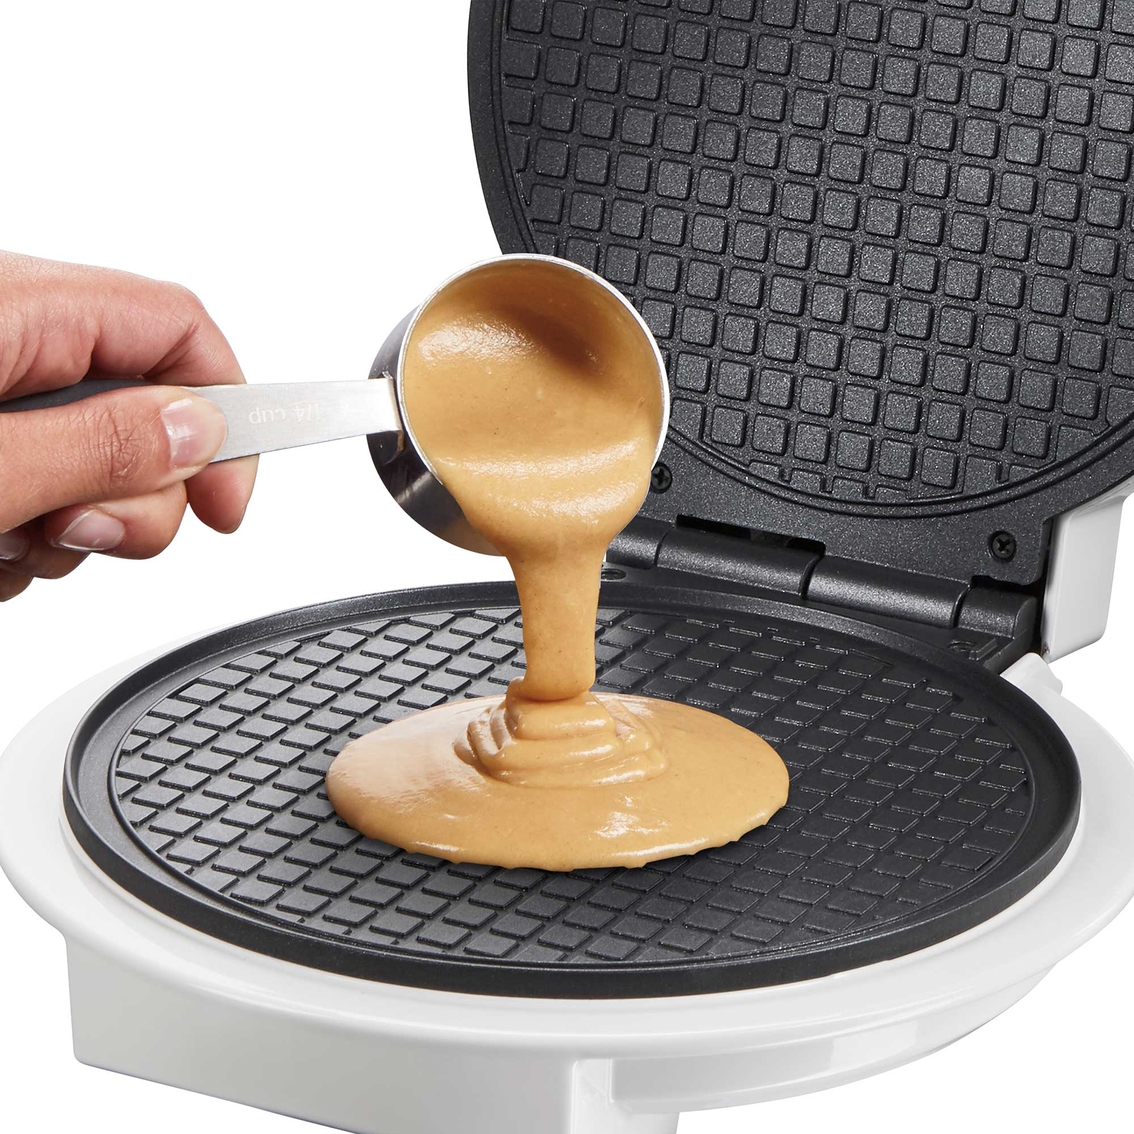 Proctor Silex Waffle Cone and Waffle Bowl Maker - Image 2 of 6